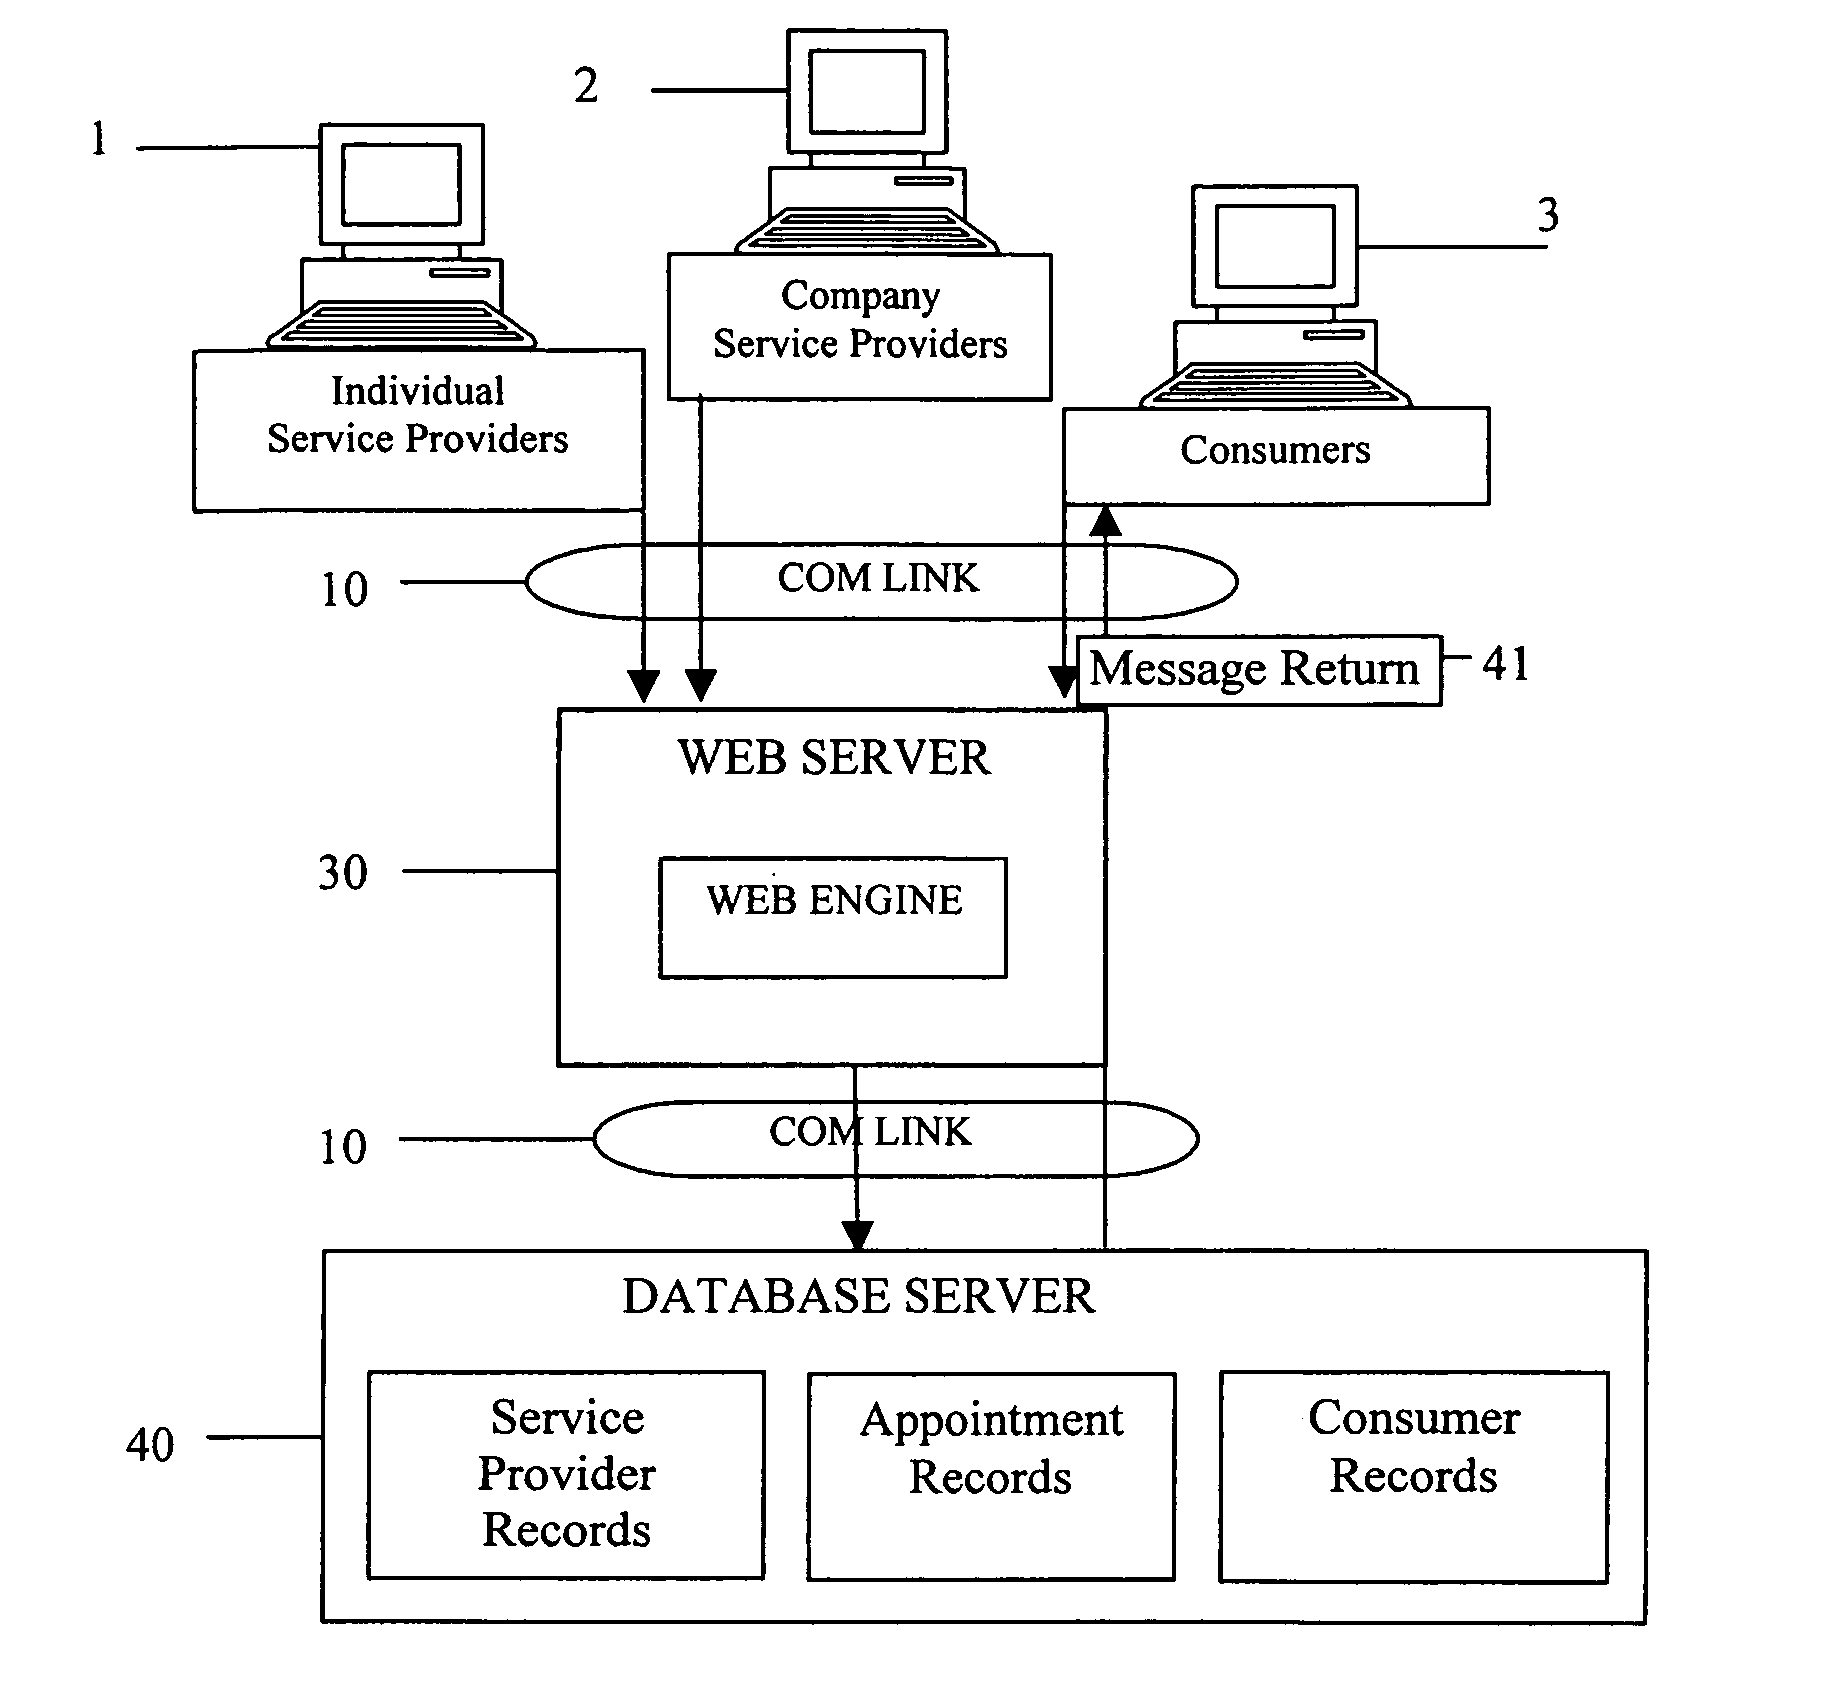 System and method for interactive coordination of scheduling, calendaring, and marketing